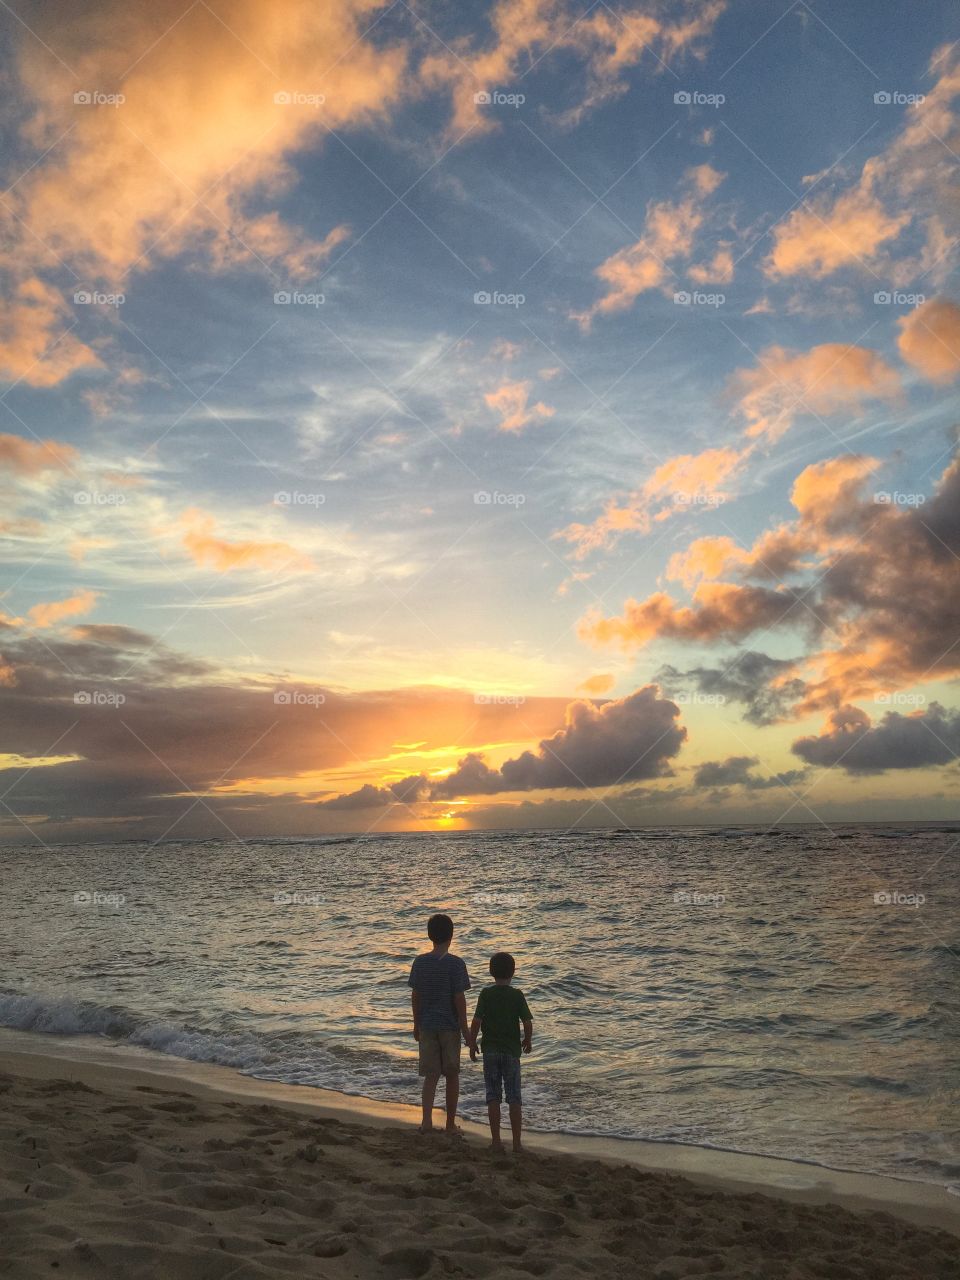 Boys in the beach at sunset